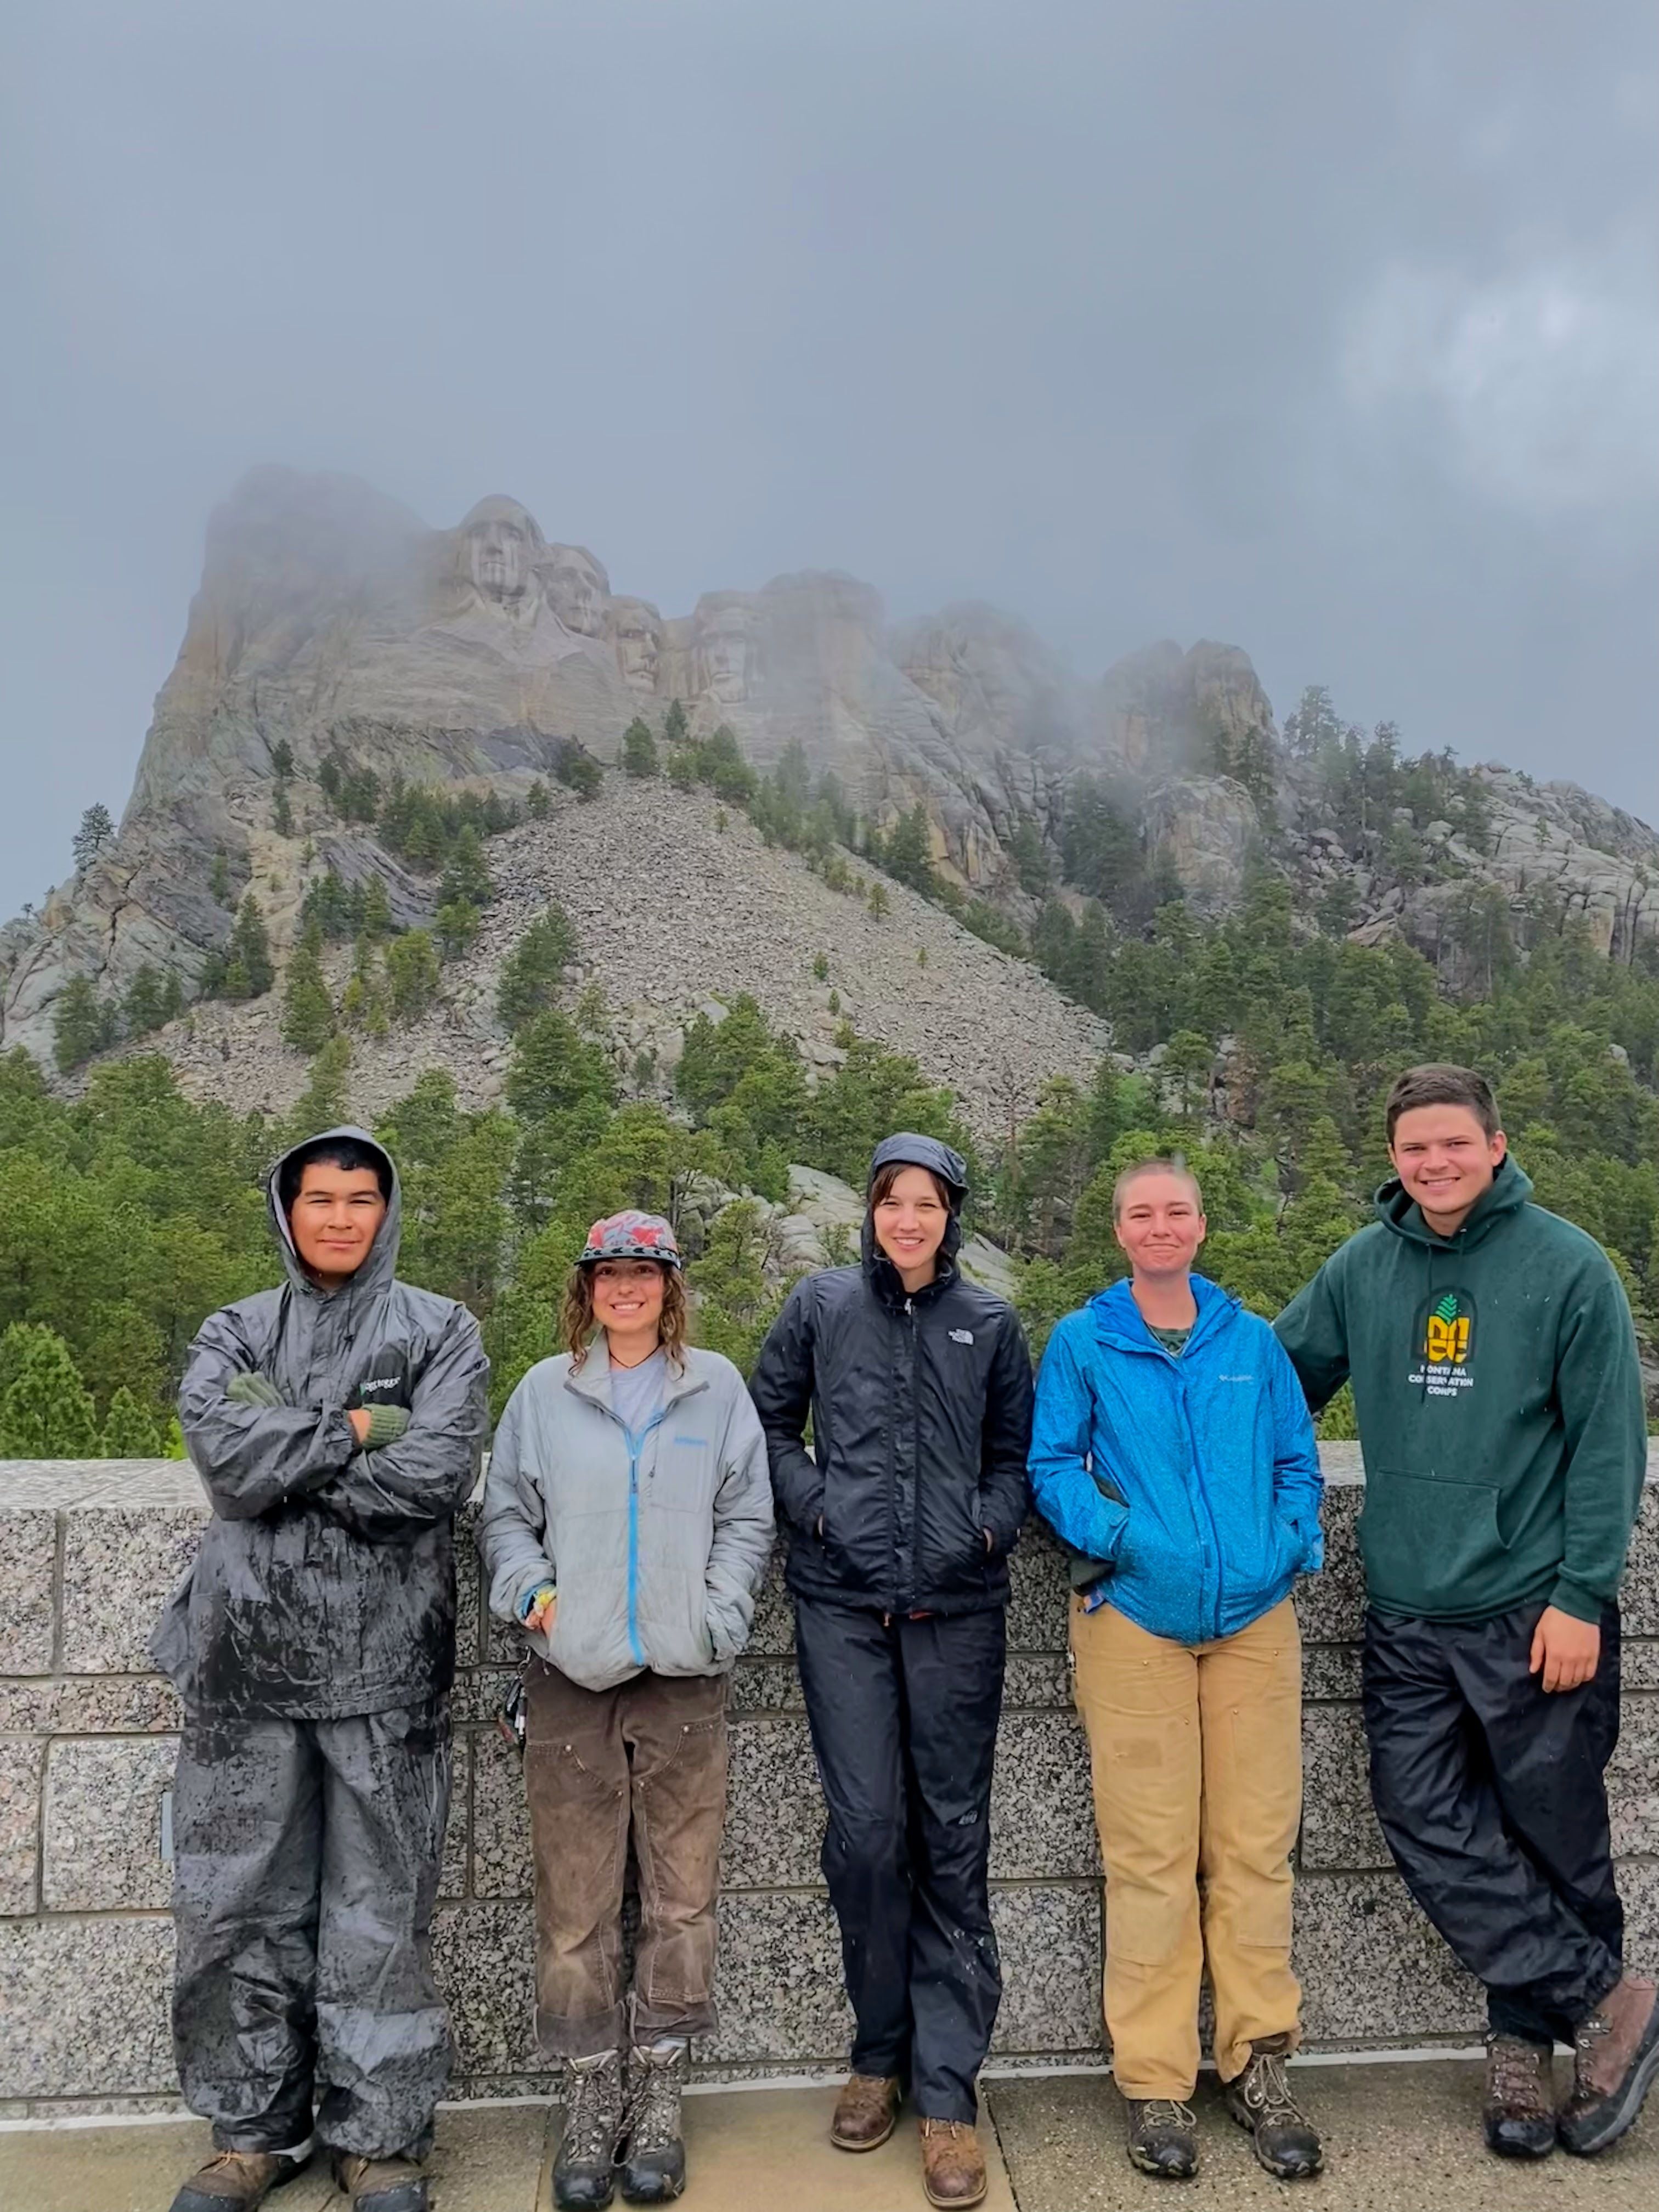 A crew poses in the rain in front of Mount Rushmore